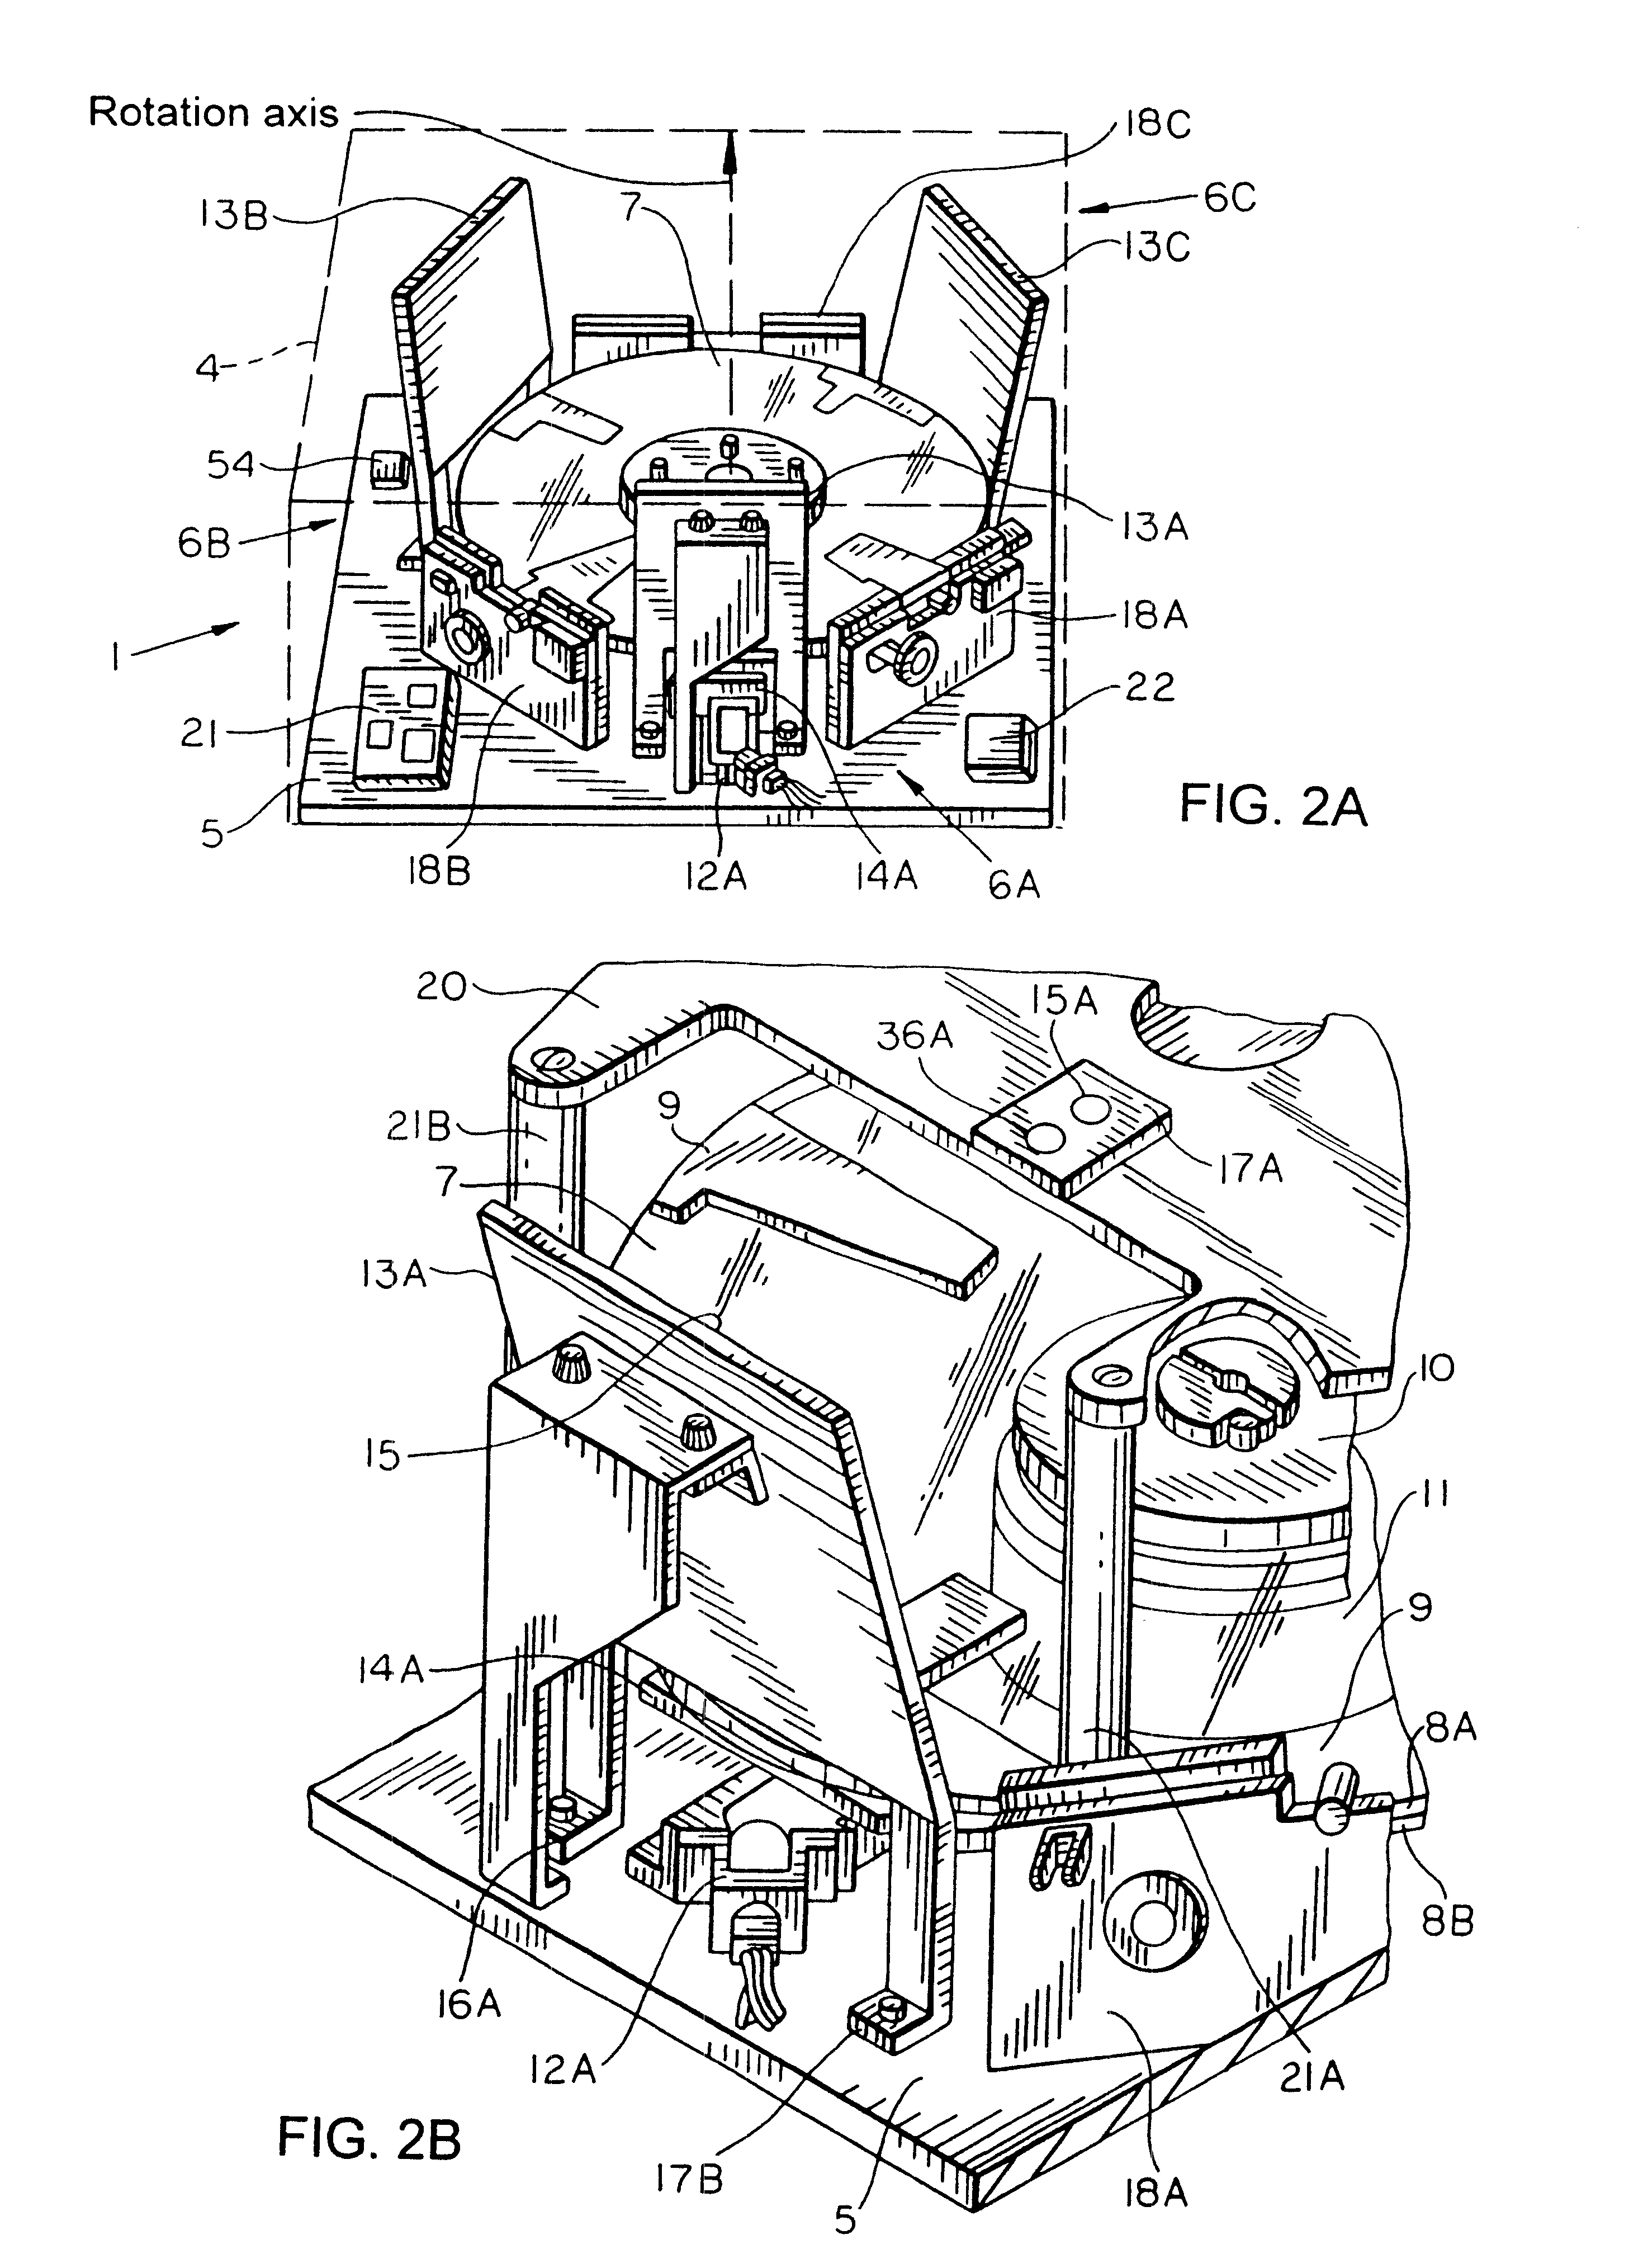 Laser code symbol scanning system with high-resolution 2-D scanning field steerable with 3-D scanning volume